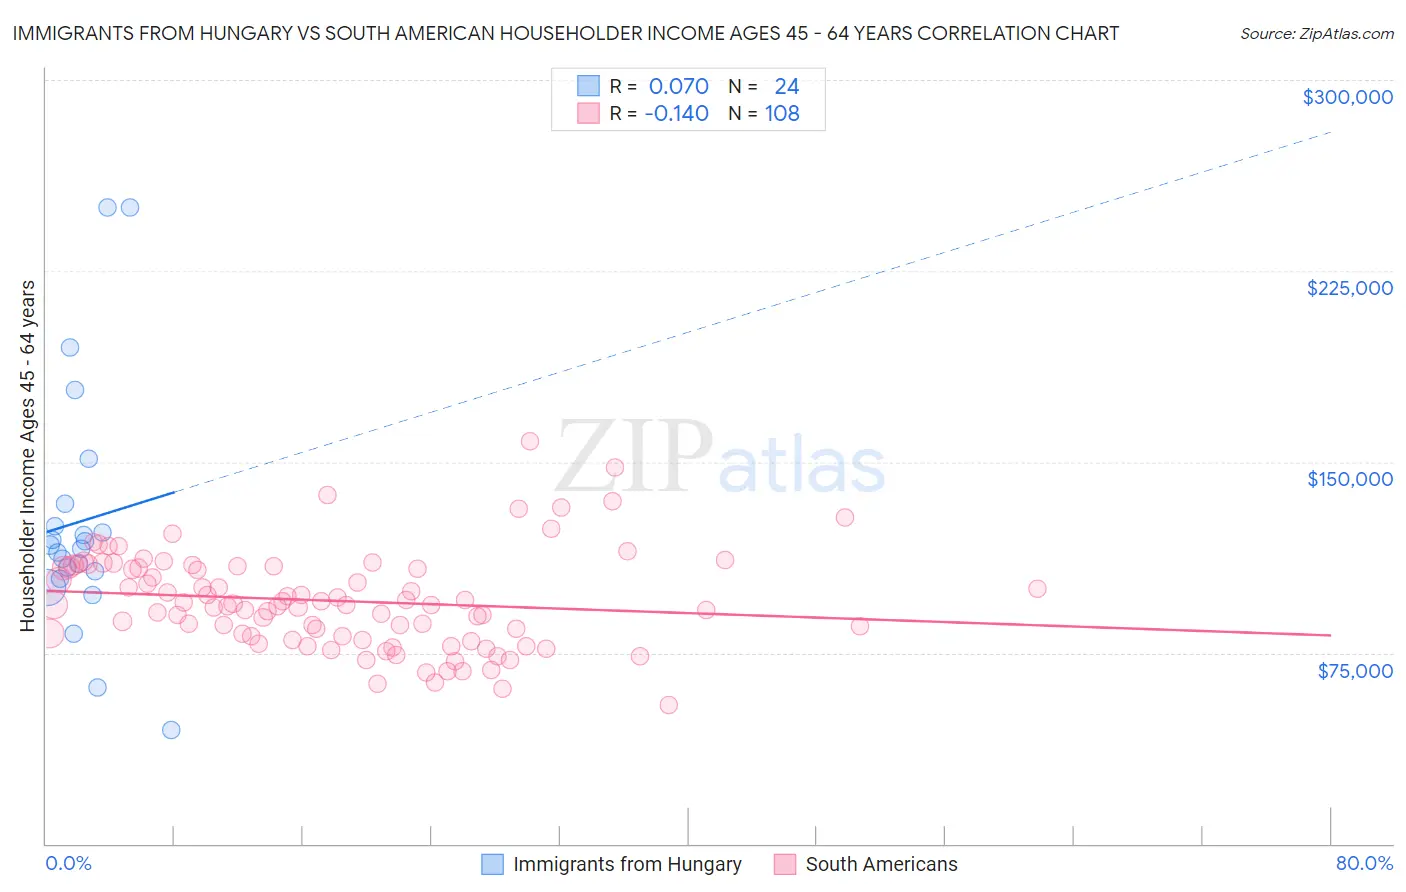 Immigrants from Hungary vs South American Householder Income Ages 45 - 64 years